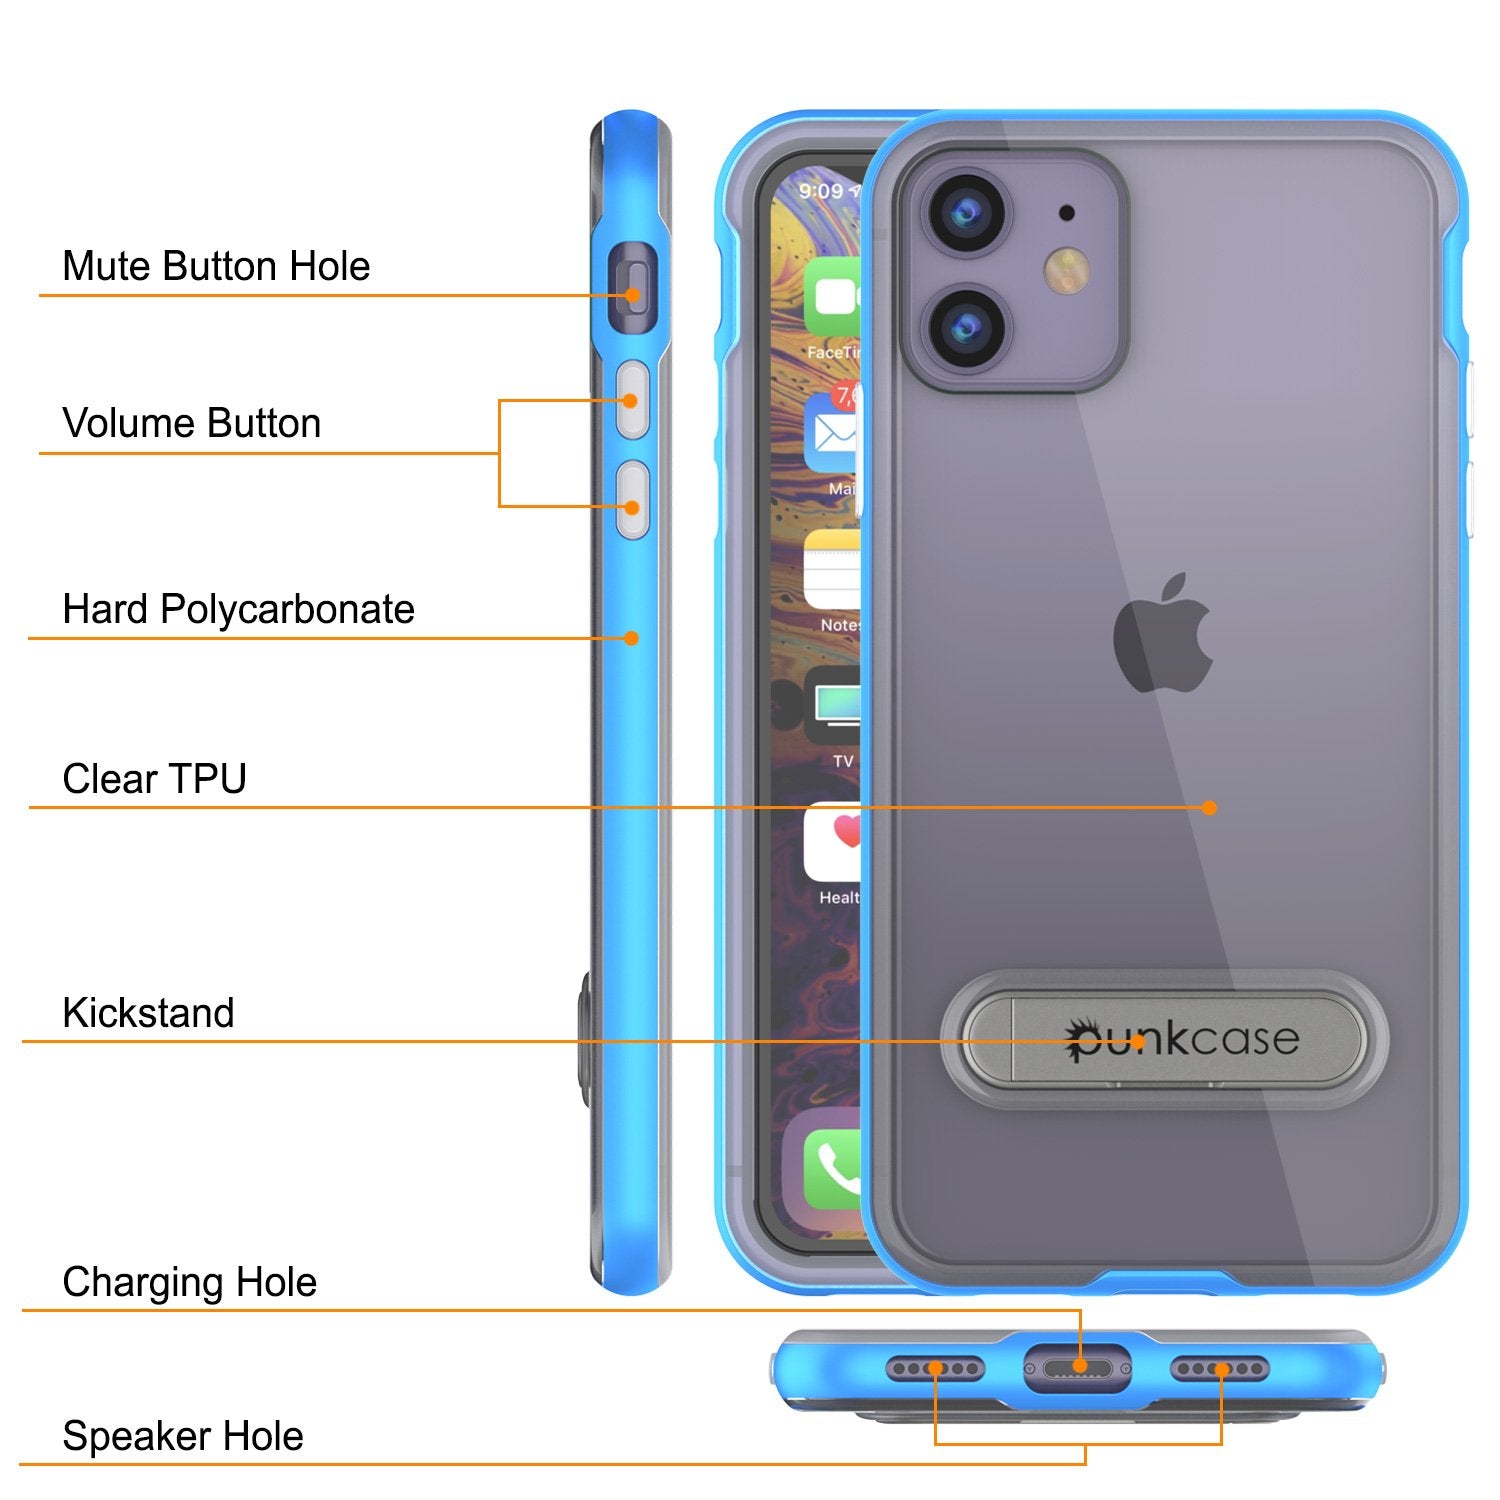 iPhone 12 Mini Case, PUNKcase [LUCID 3.0 Series] [Slim Fit] Protective Cover w/ Integrated Screen Protector [Blue]